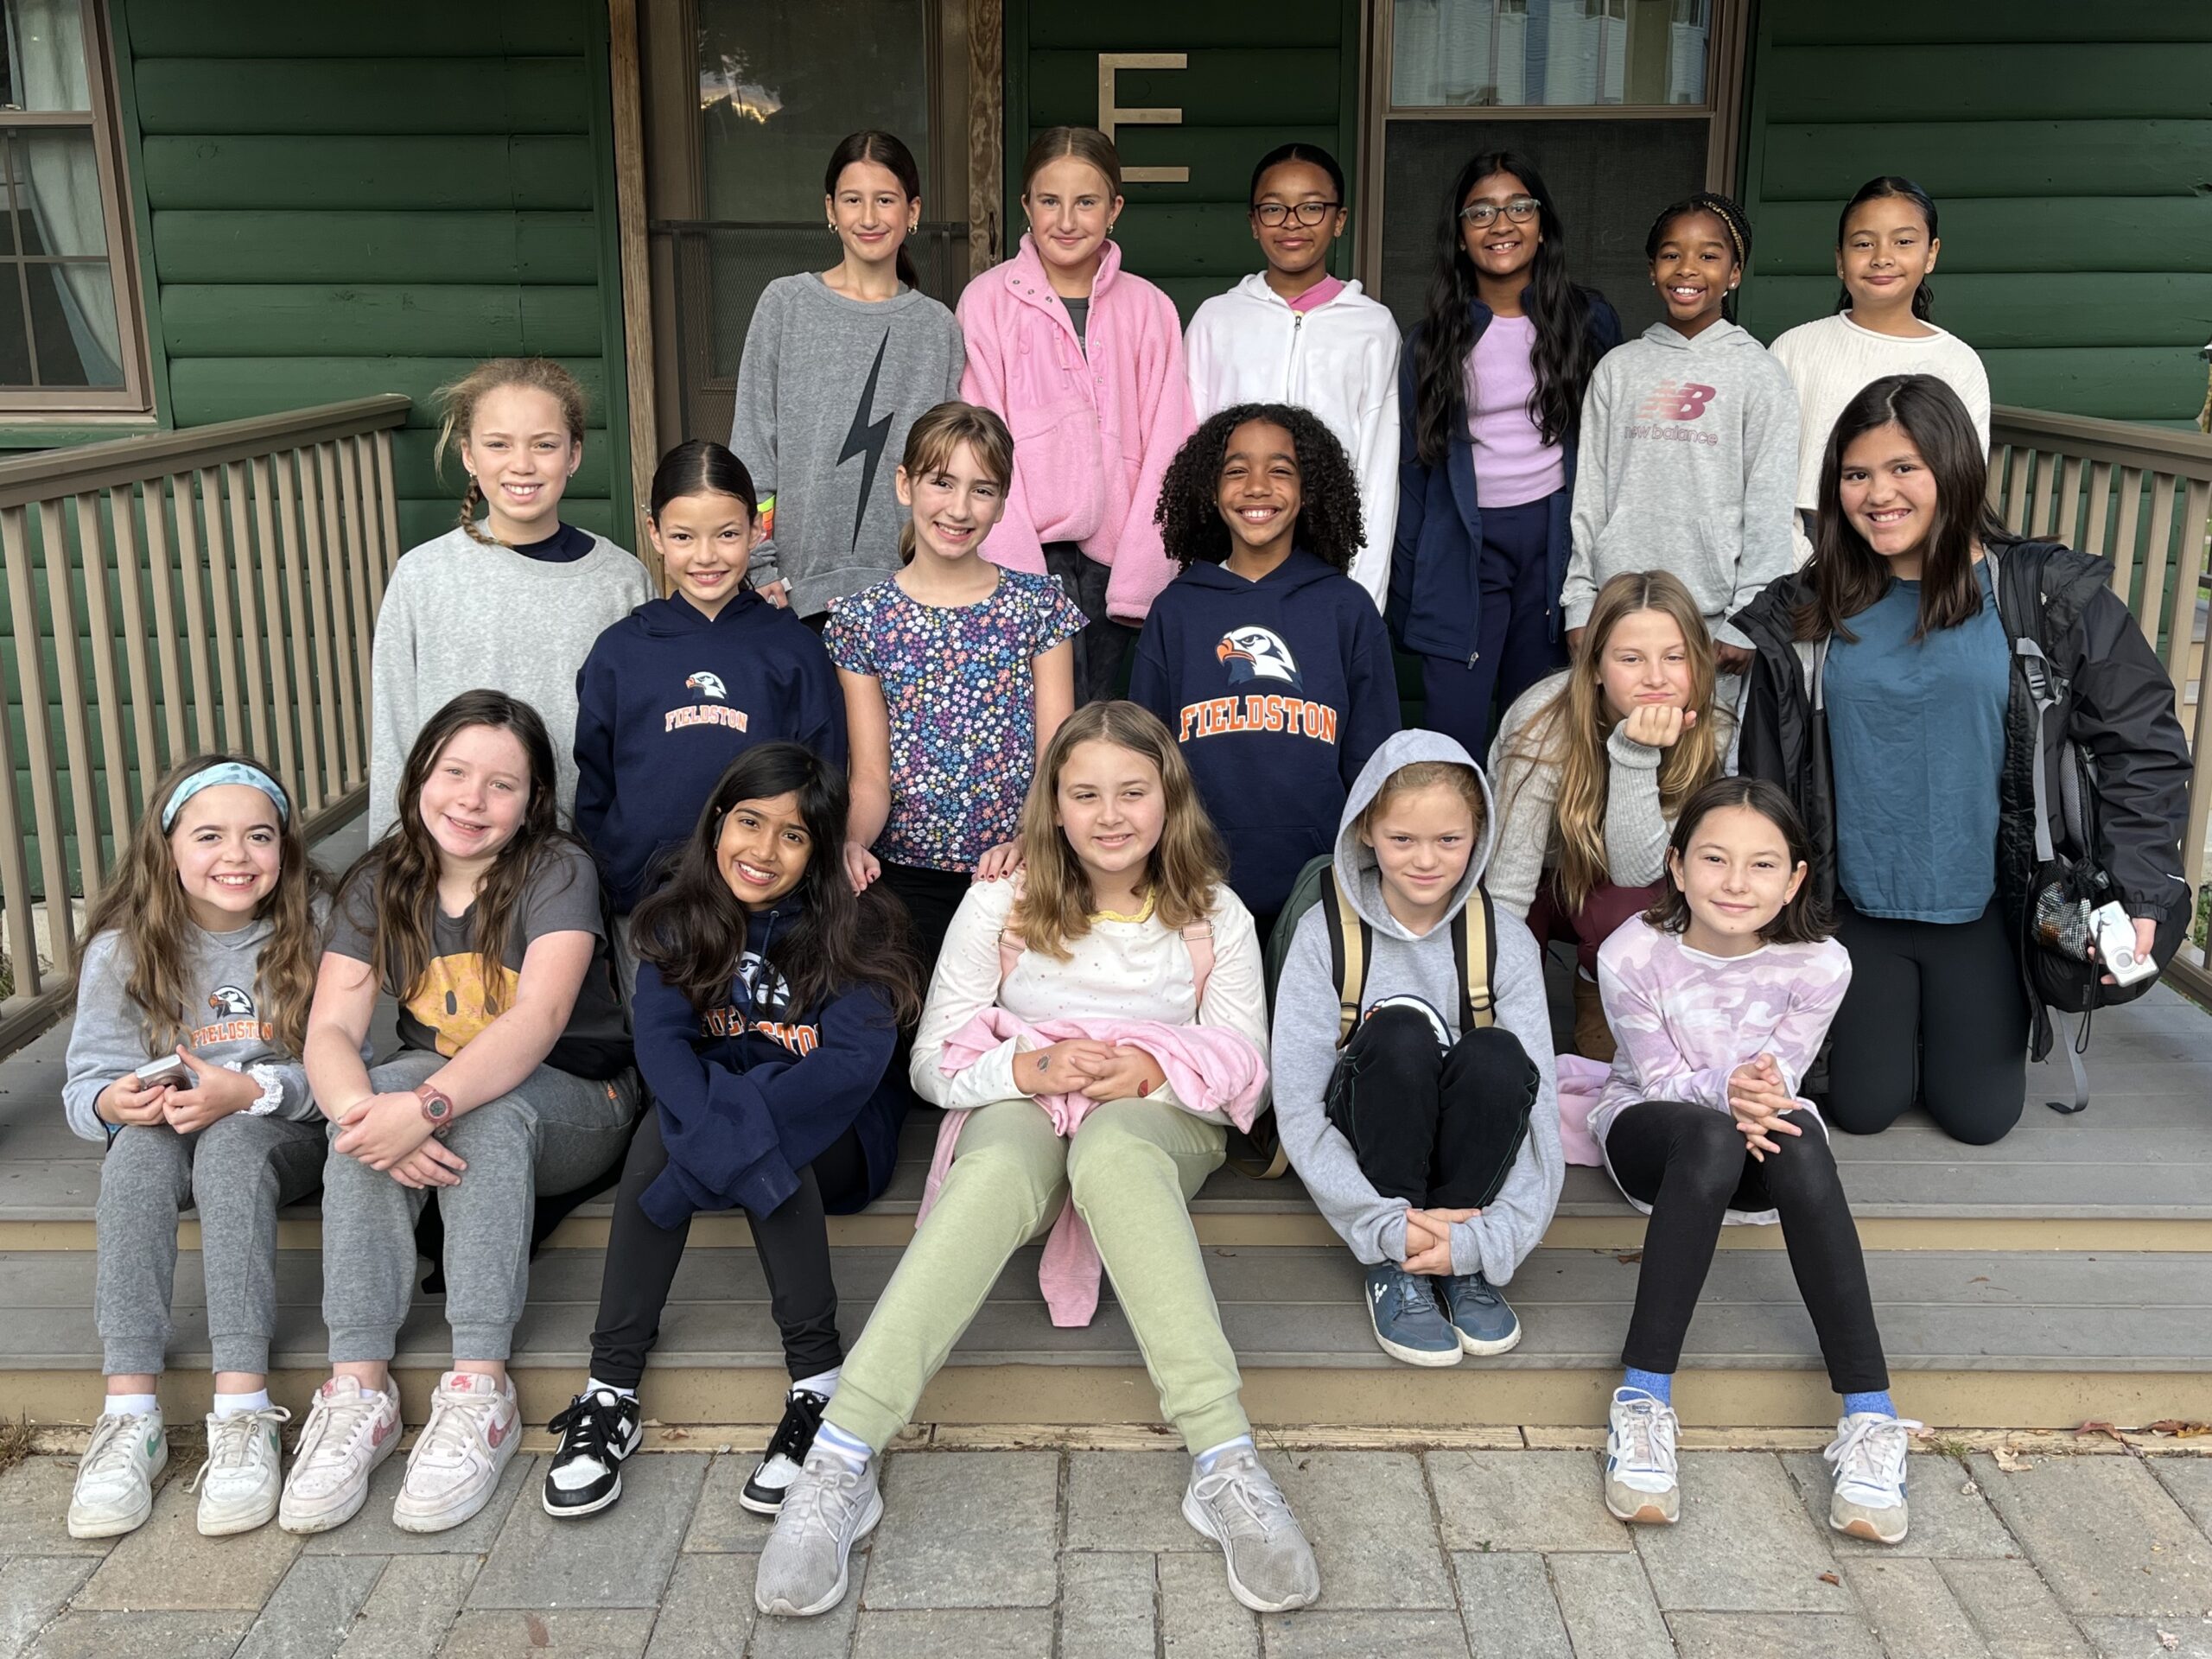 5th Graders from Fieldston Lower pose and smile together outside of cabin at Nature's Classroom.